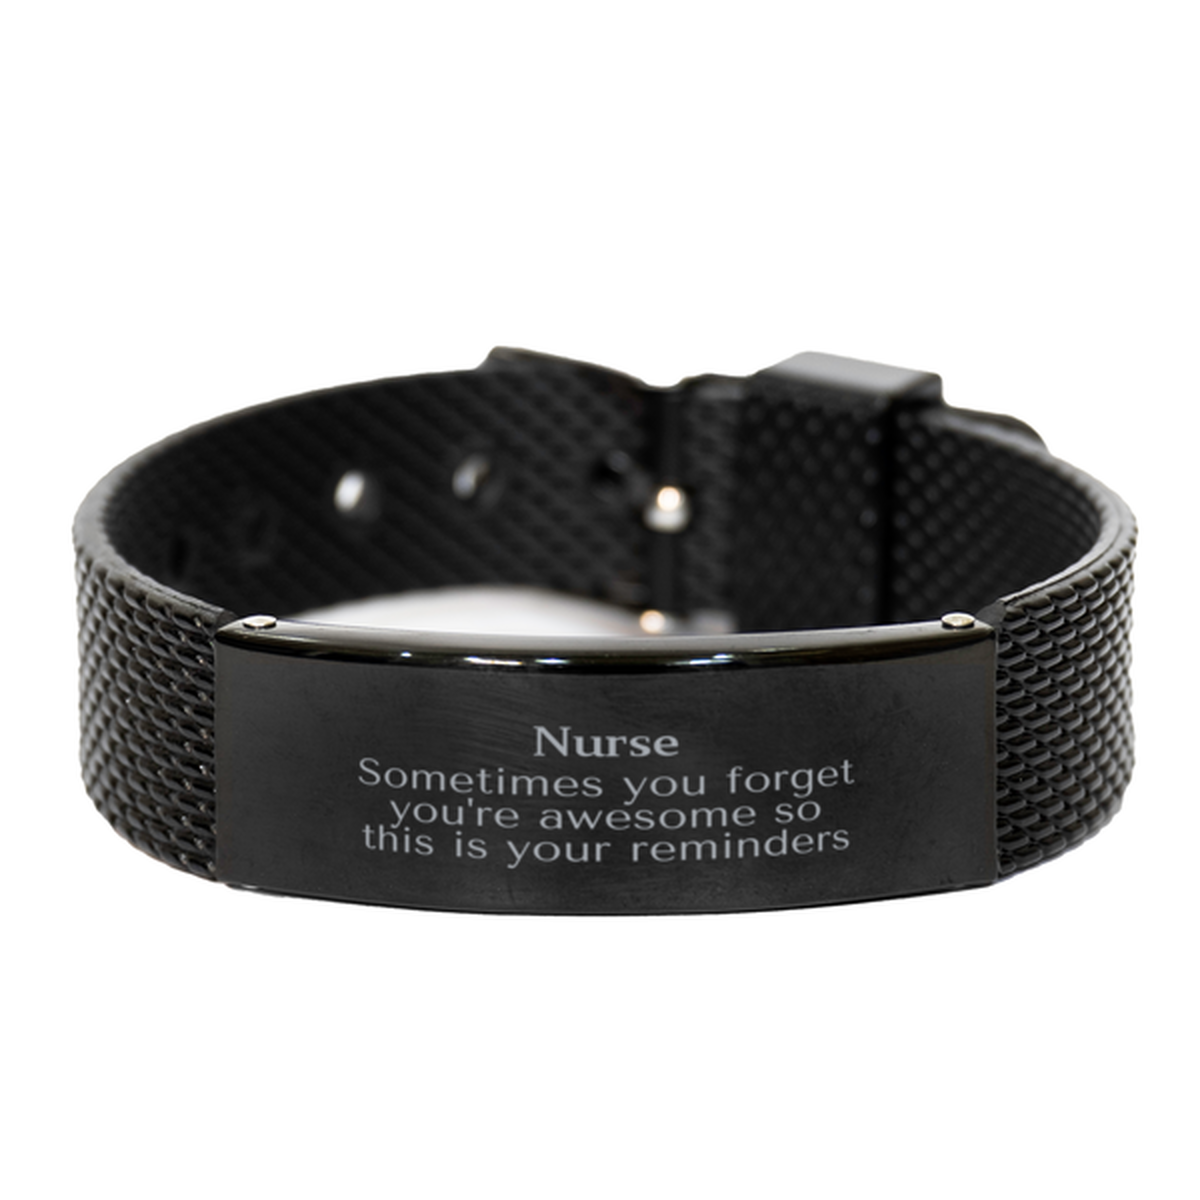 Sentimental Nurse Black Shark Mesh Bracelet, Nurse Sometimes you forget you're awesome so this is your reminders, Graduation Christmas Birthday Gifts for Nurse, Men, Women, Coworkers